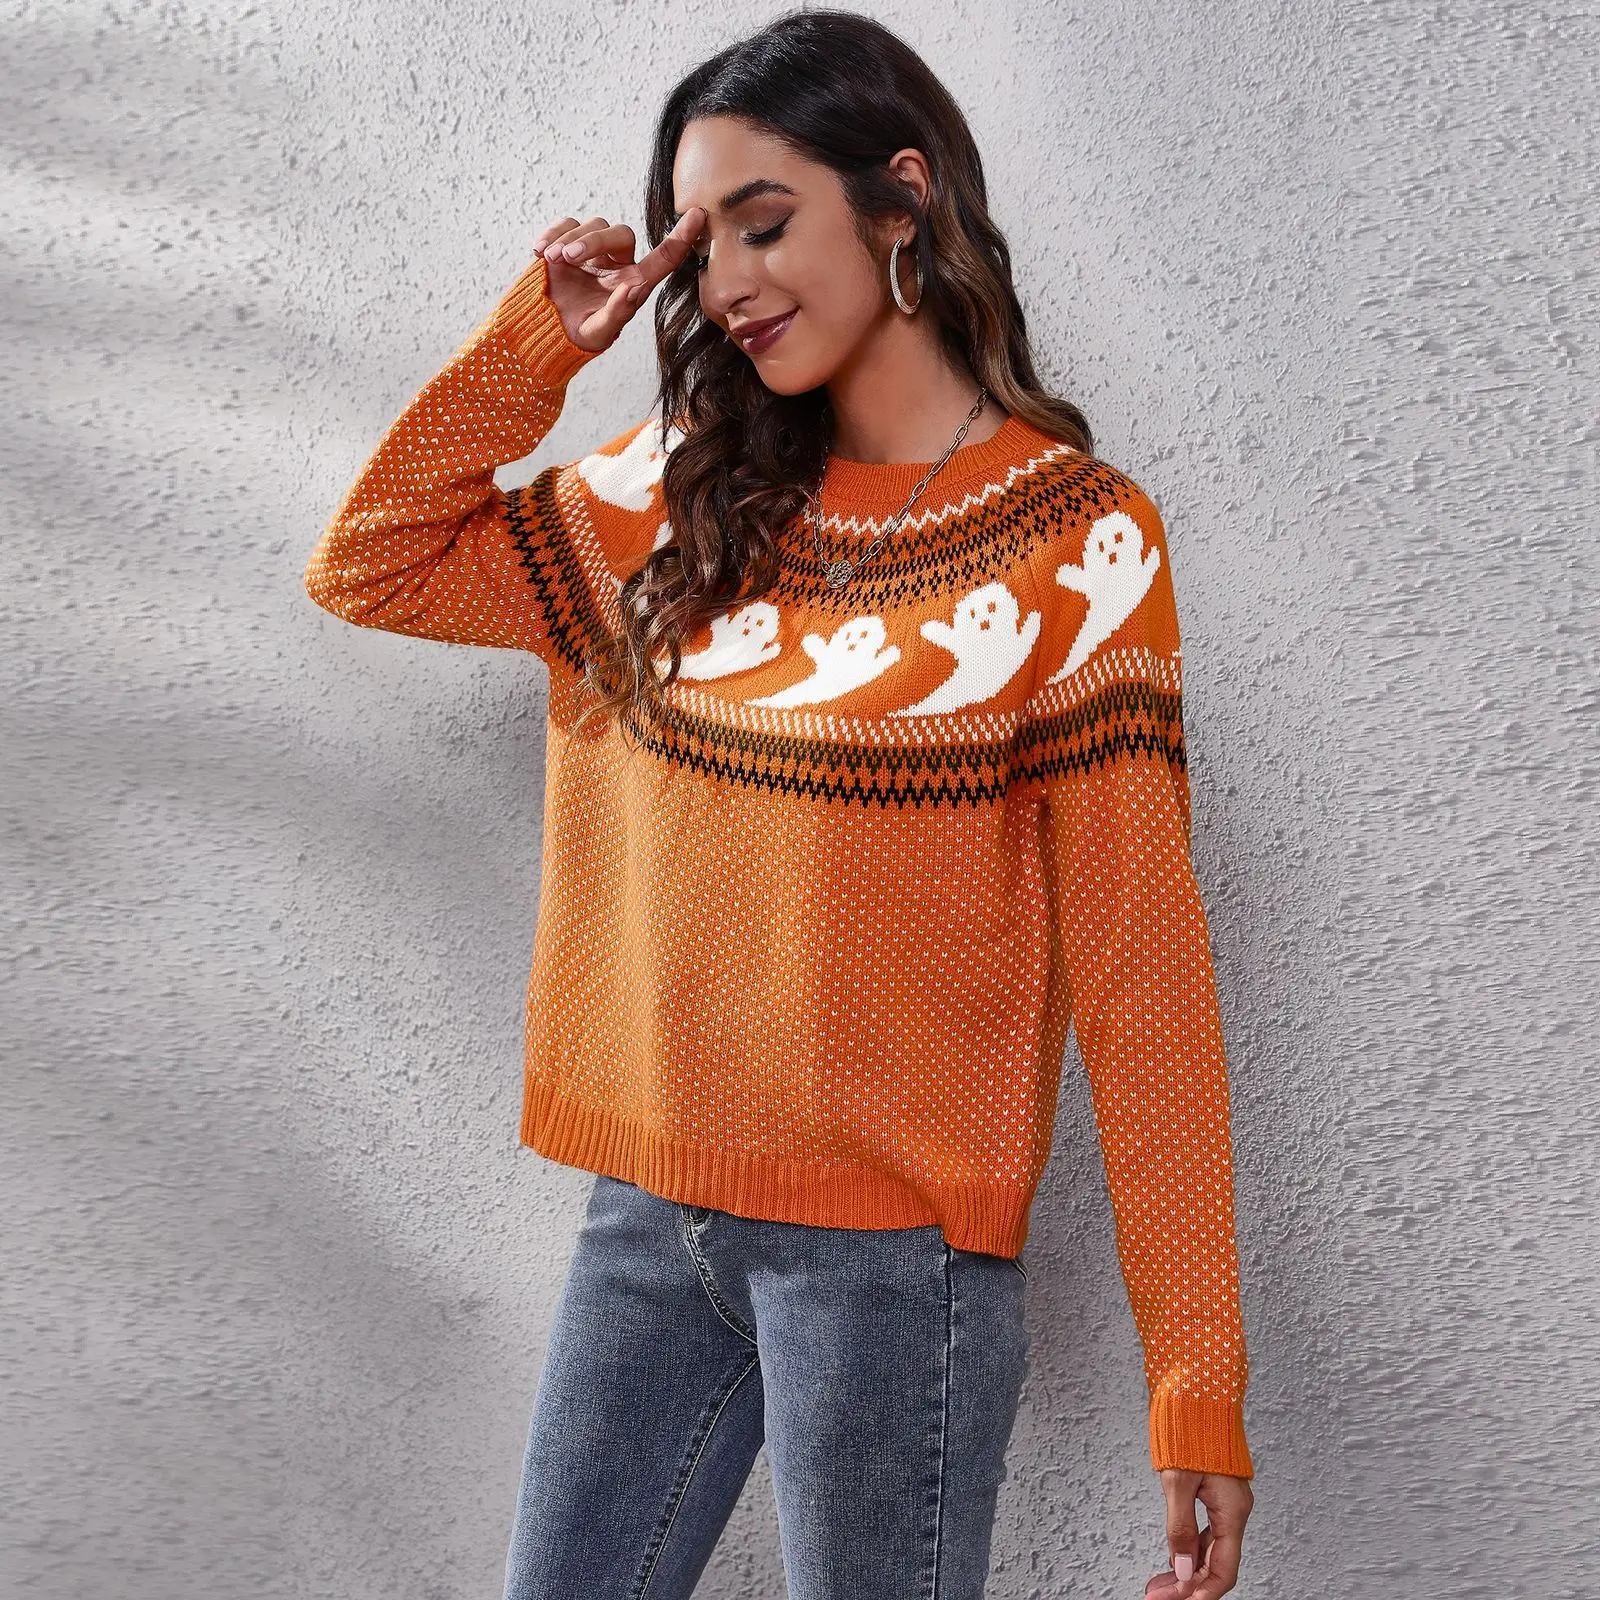 Halloween Ghost Retro Polka Dot Long-sleeved Knitted Sweater Women's Loose Autumn and Winter Women's Clothing enlarge